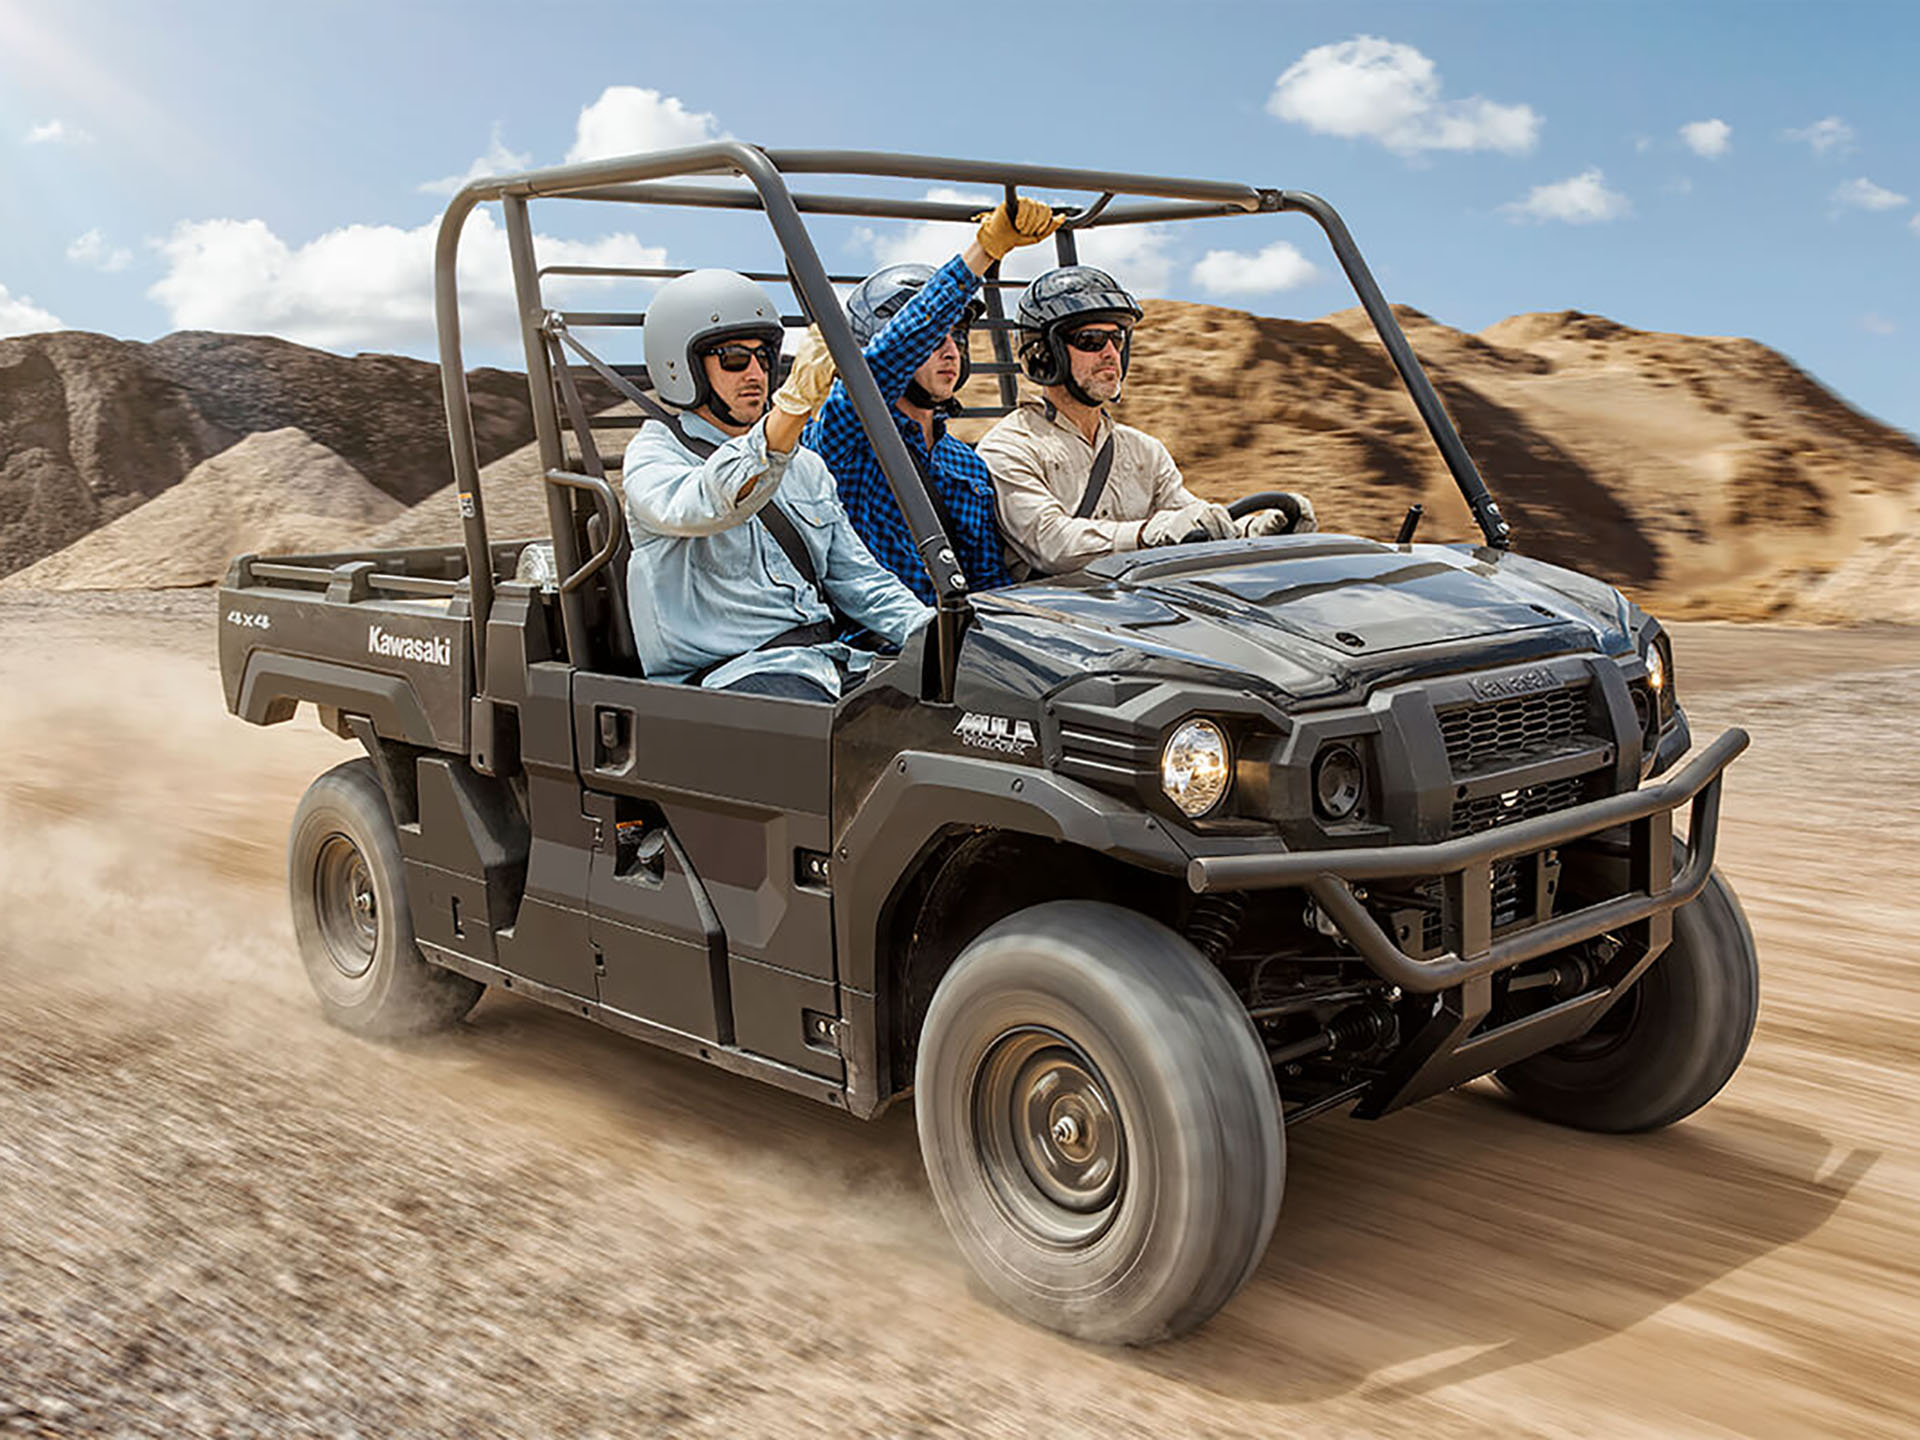 2023 Kawasaki MULE PRO - FX™ for sale in the Pompano Beach, FL area. Get the best drive out price on 2023 Kawasaki MULE PRO - FX™ and compare.